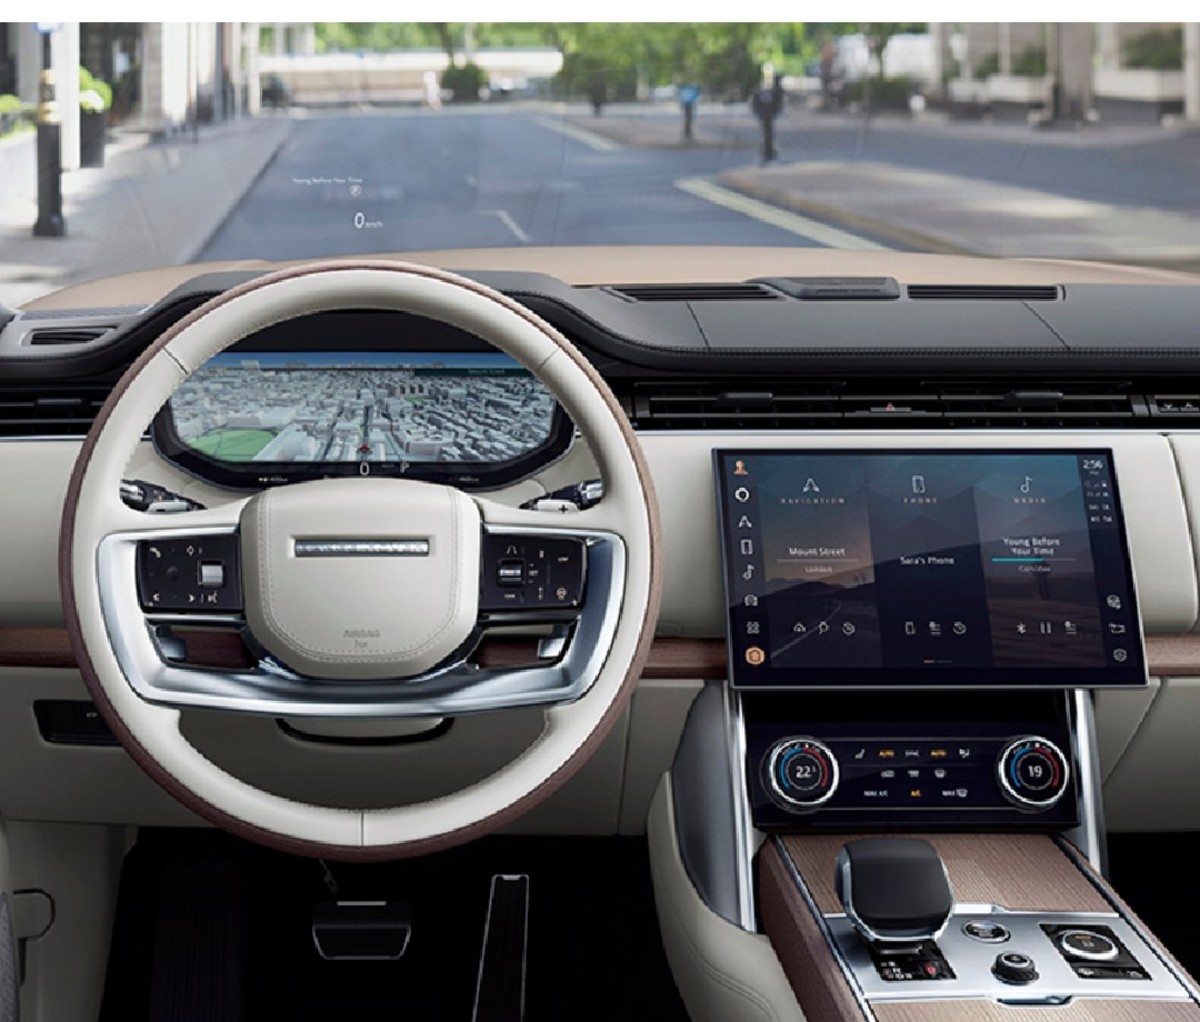 2022 Range Rover front driver's side interior and dash